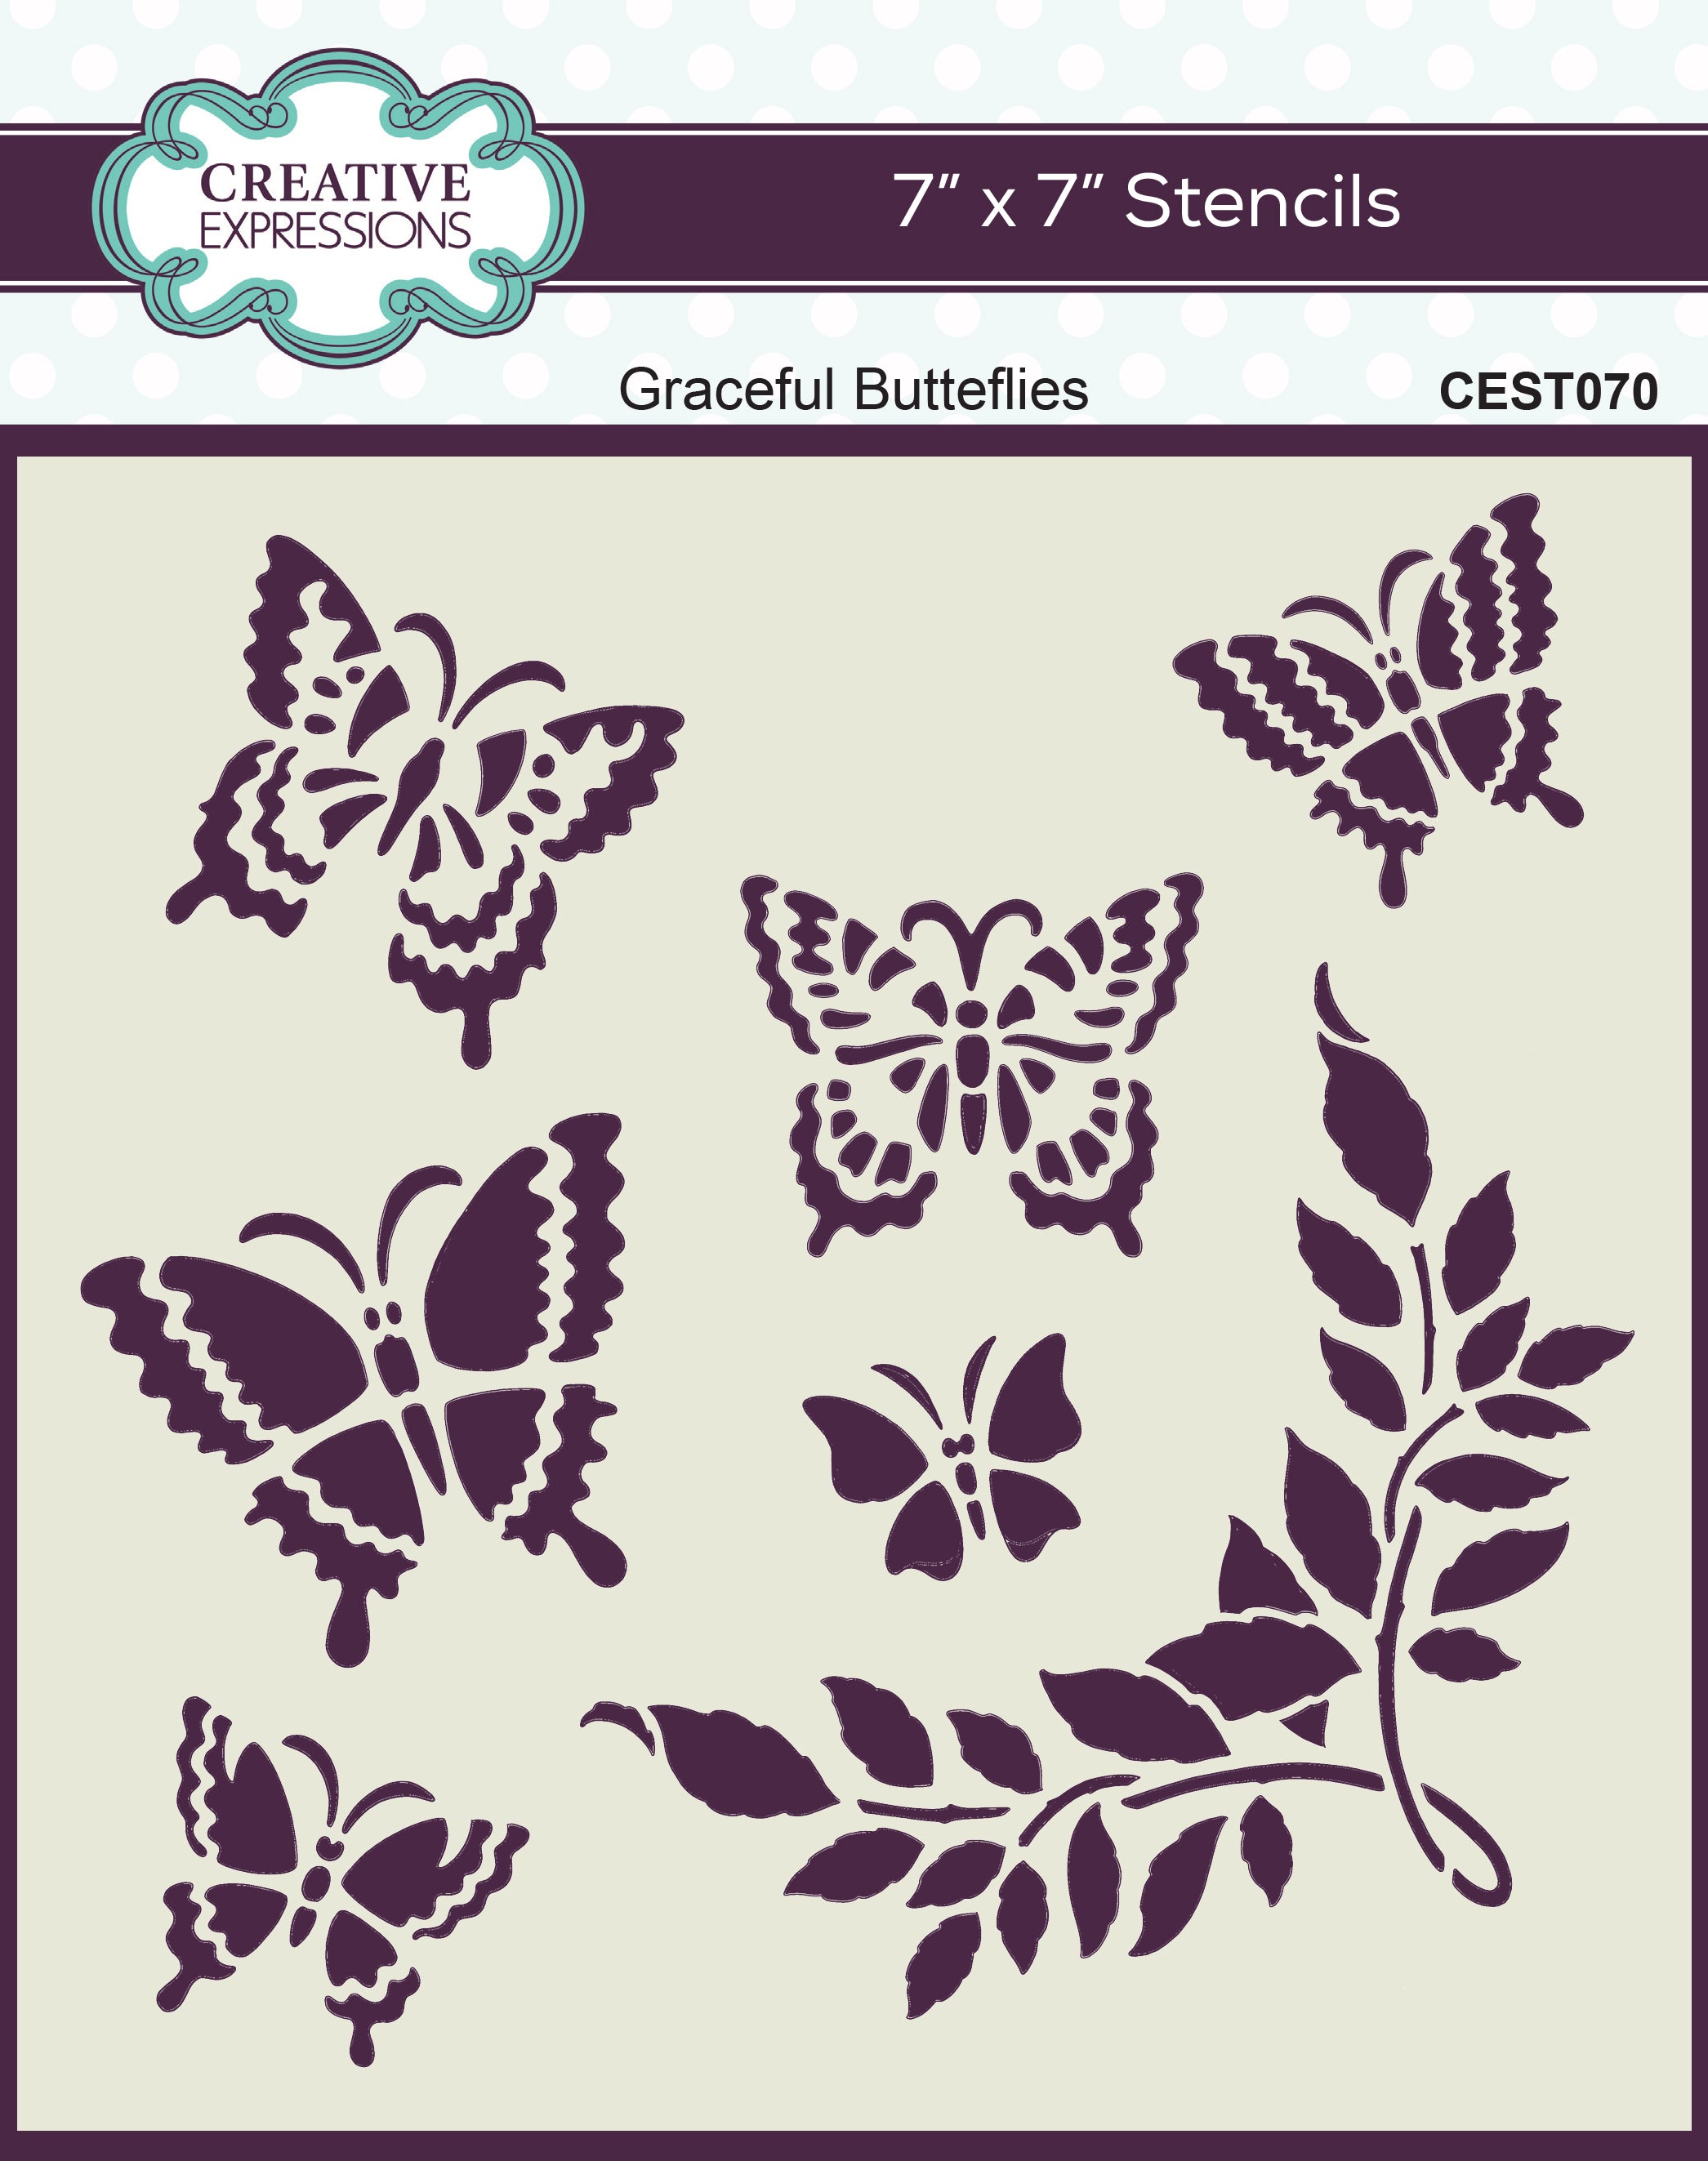 Creative Expressions Graceful Butterflies 7 in x 7 in Stencil